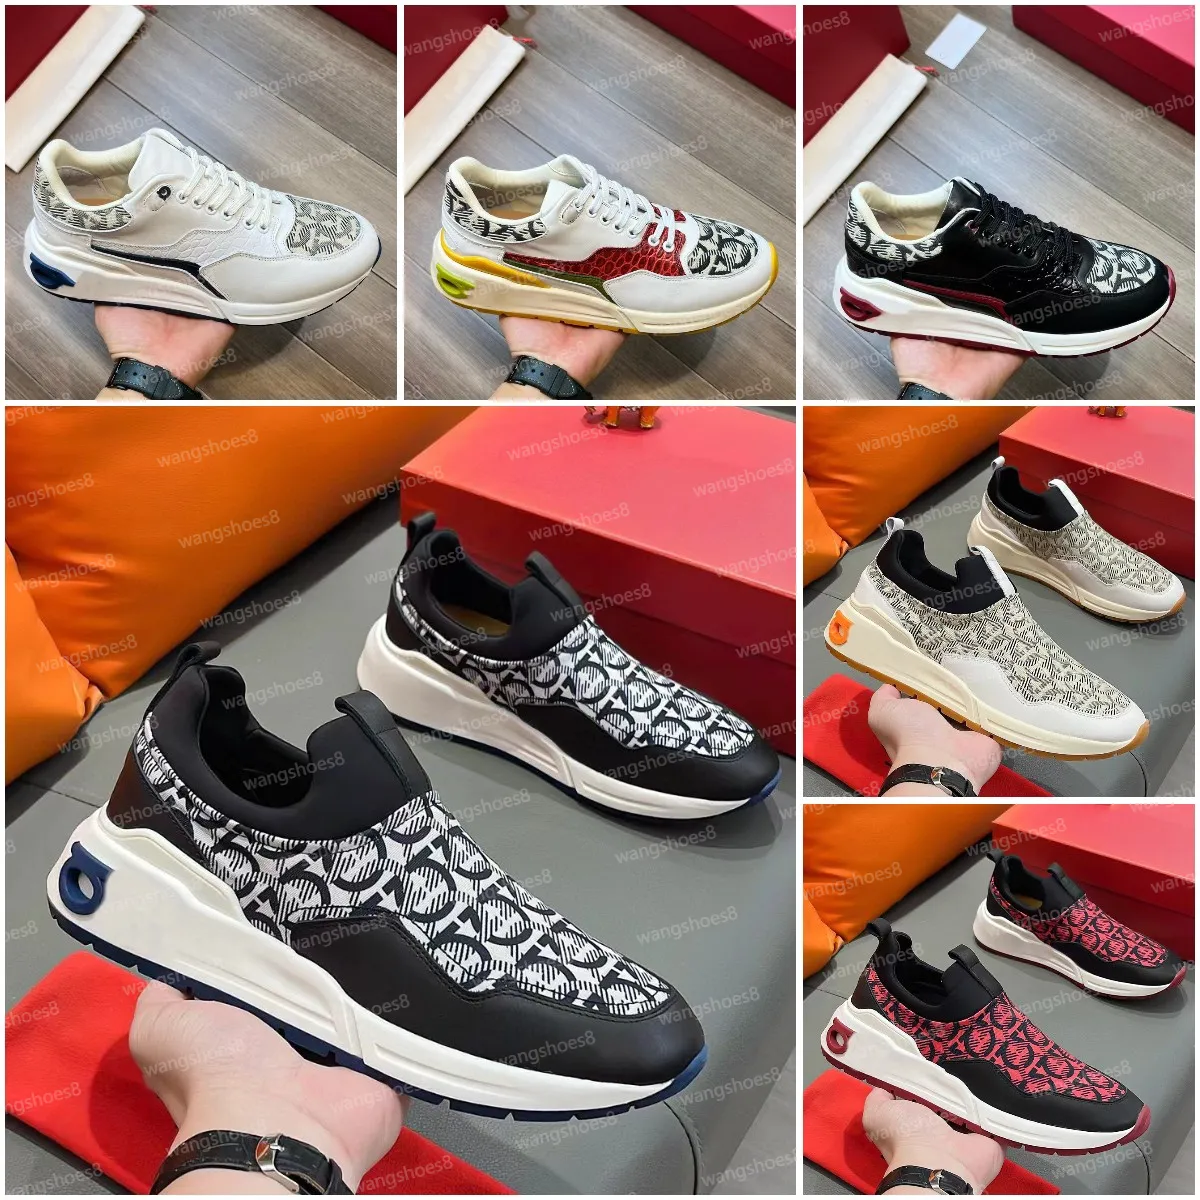 Designer Shoes Men Gancini Low cut sneaker luxury leather Canvas rubber Slip on sneaker Size fashion outdoors Casual Shoes Runner Sole Wallabee Shoes Size 39-45